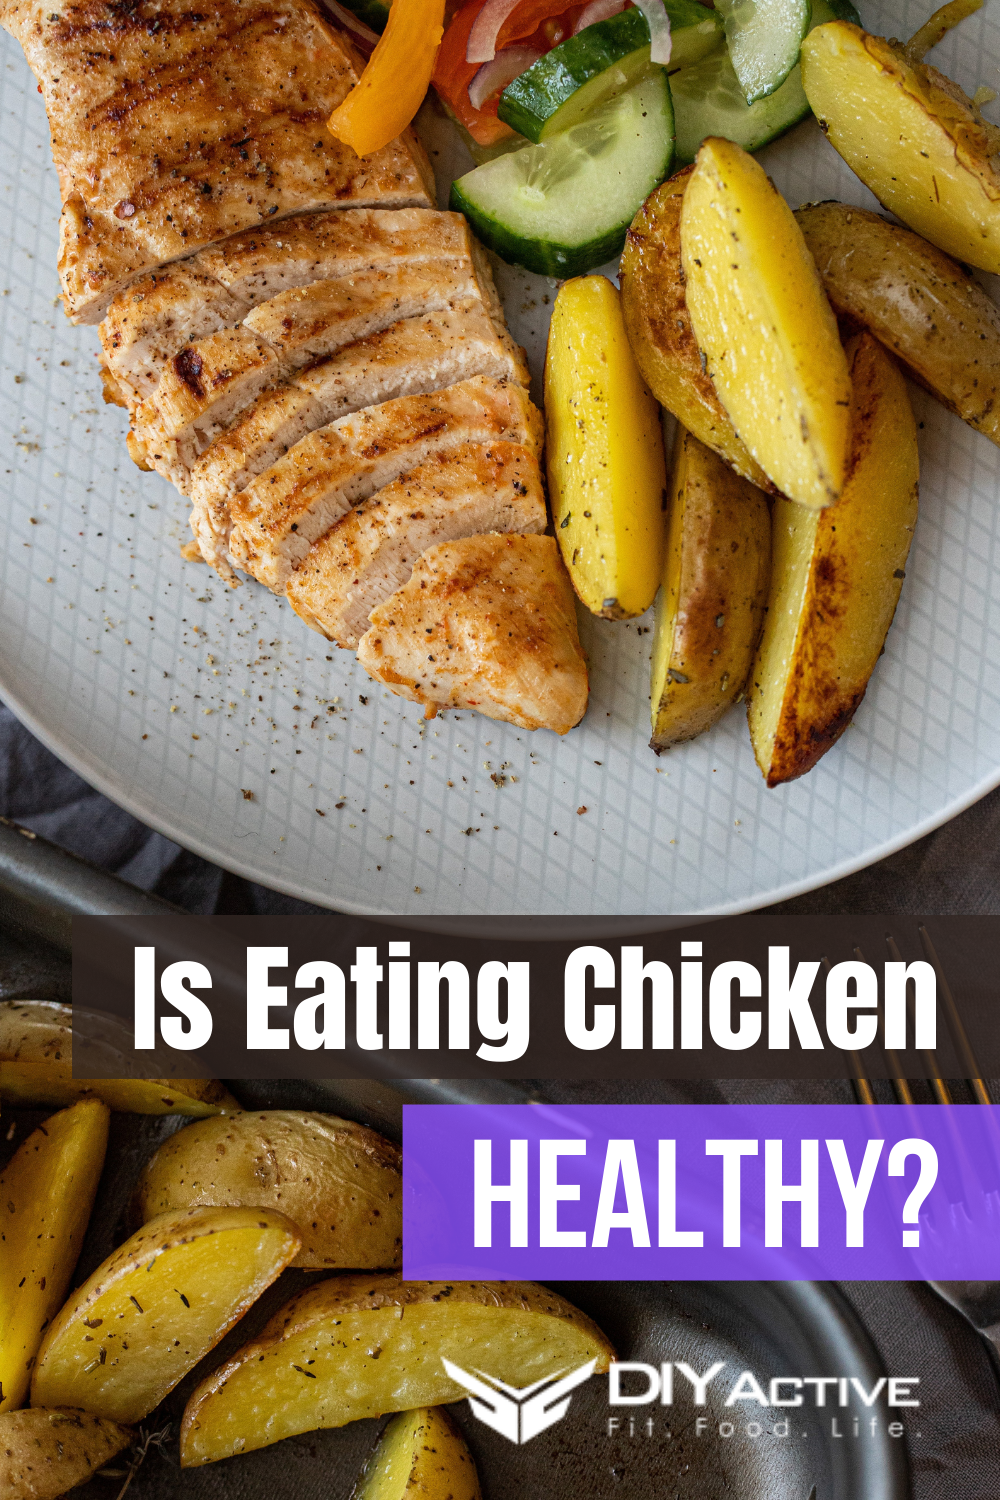 Is Eating Chicken Healthy for You?